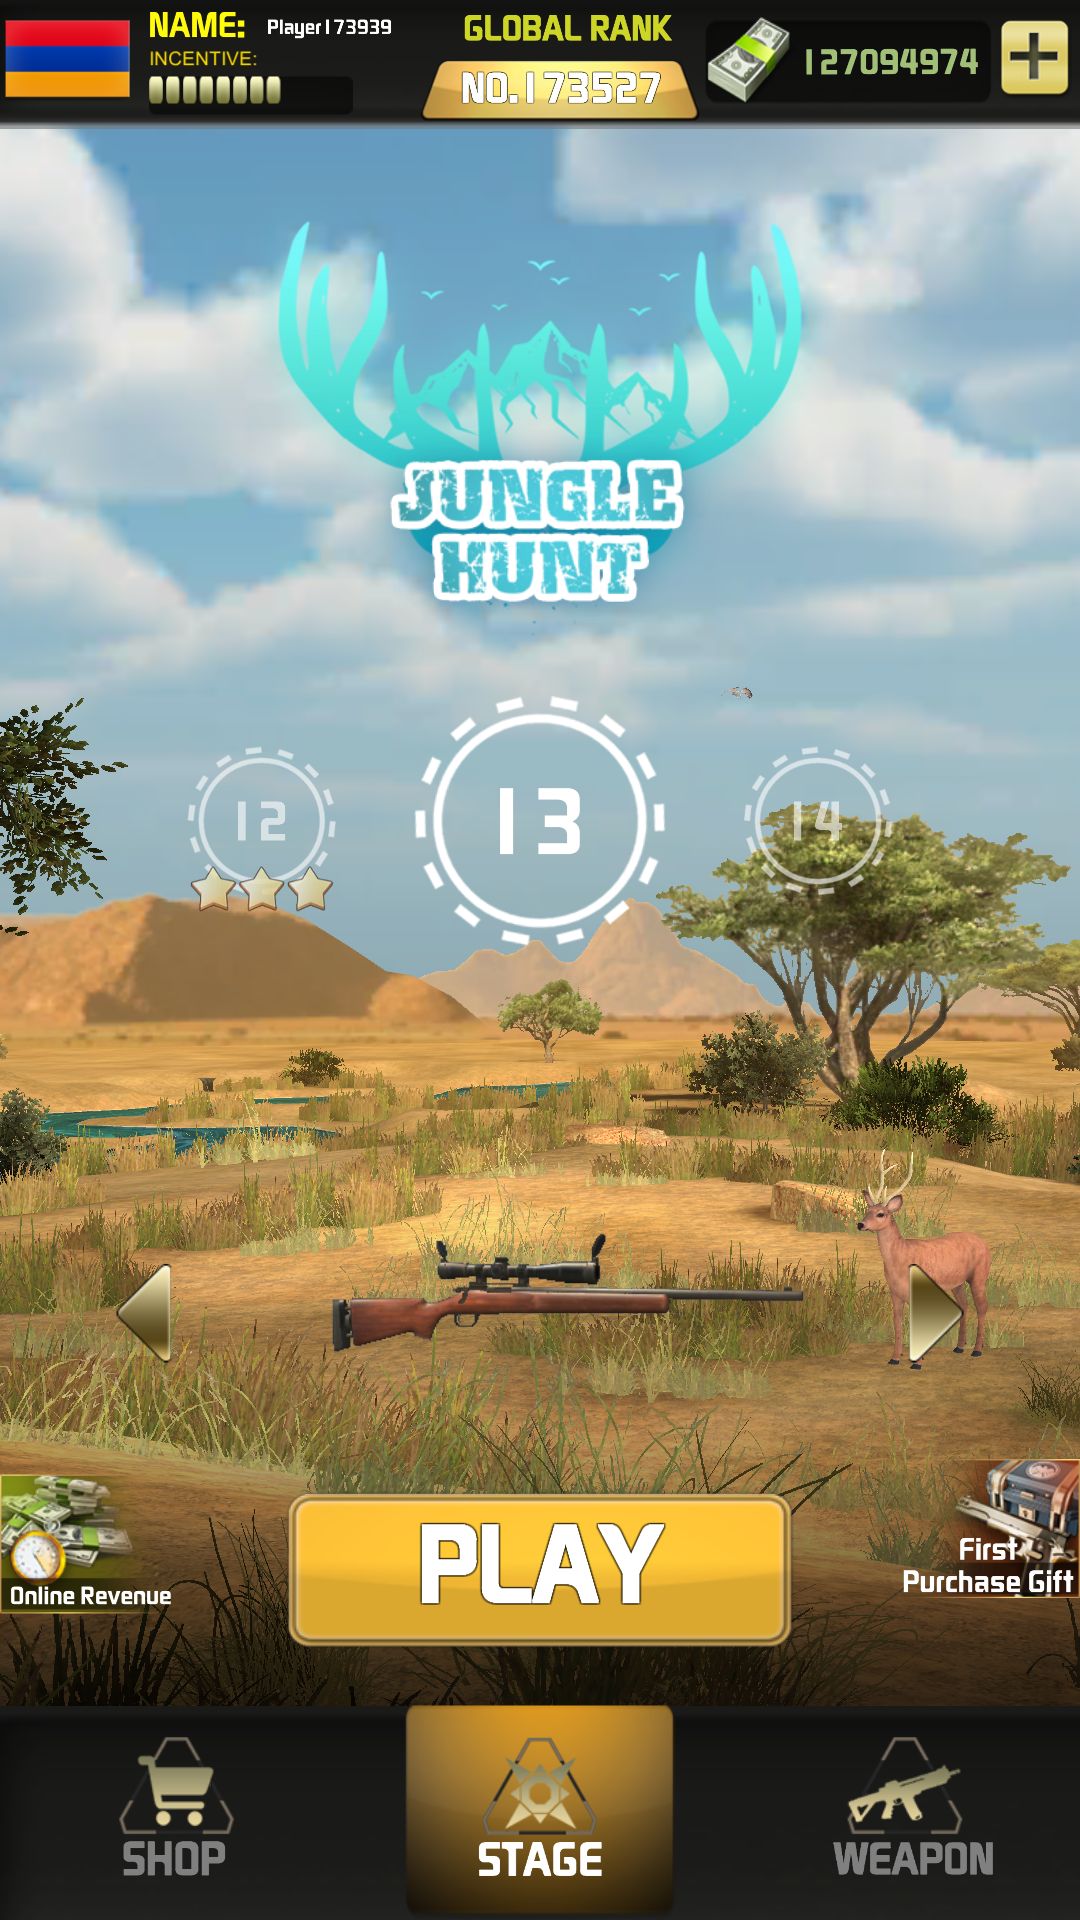 Download The Hunting World - 3D Wild Shooting Game Android free game.